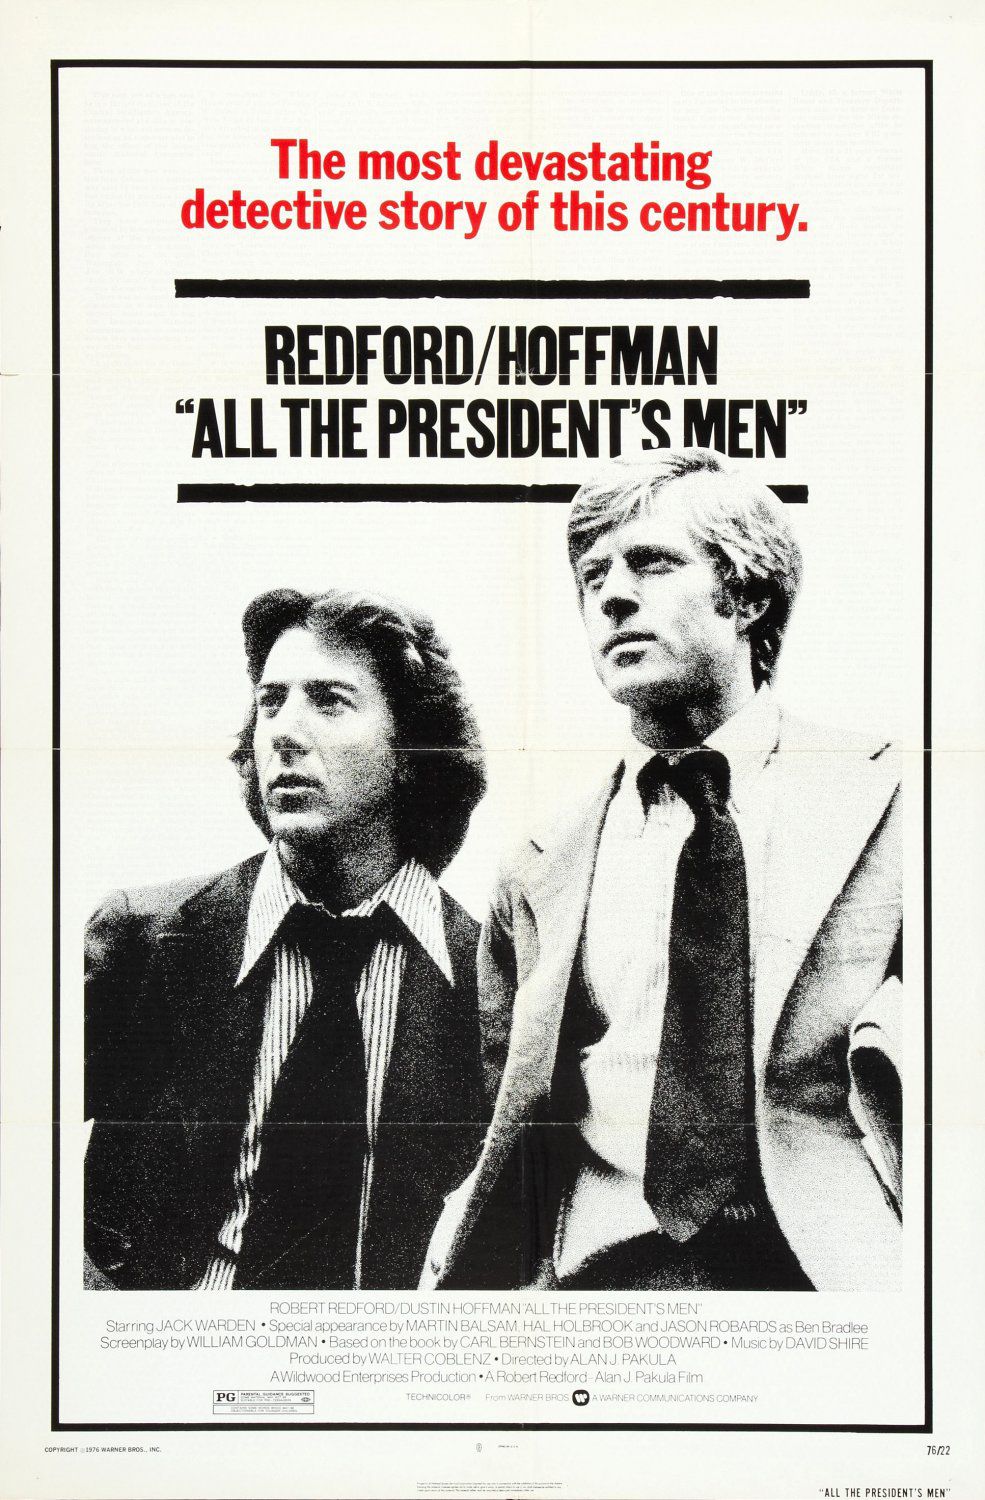 The movie poster for All the President's Men